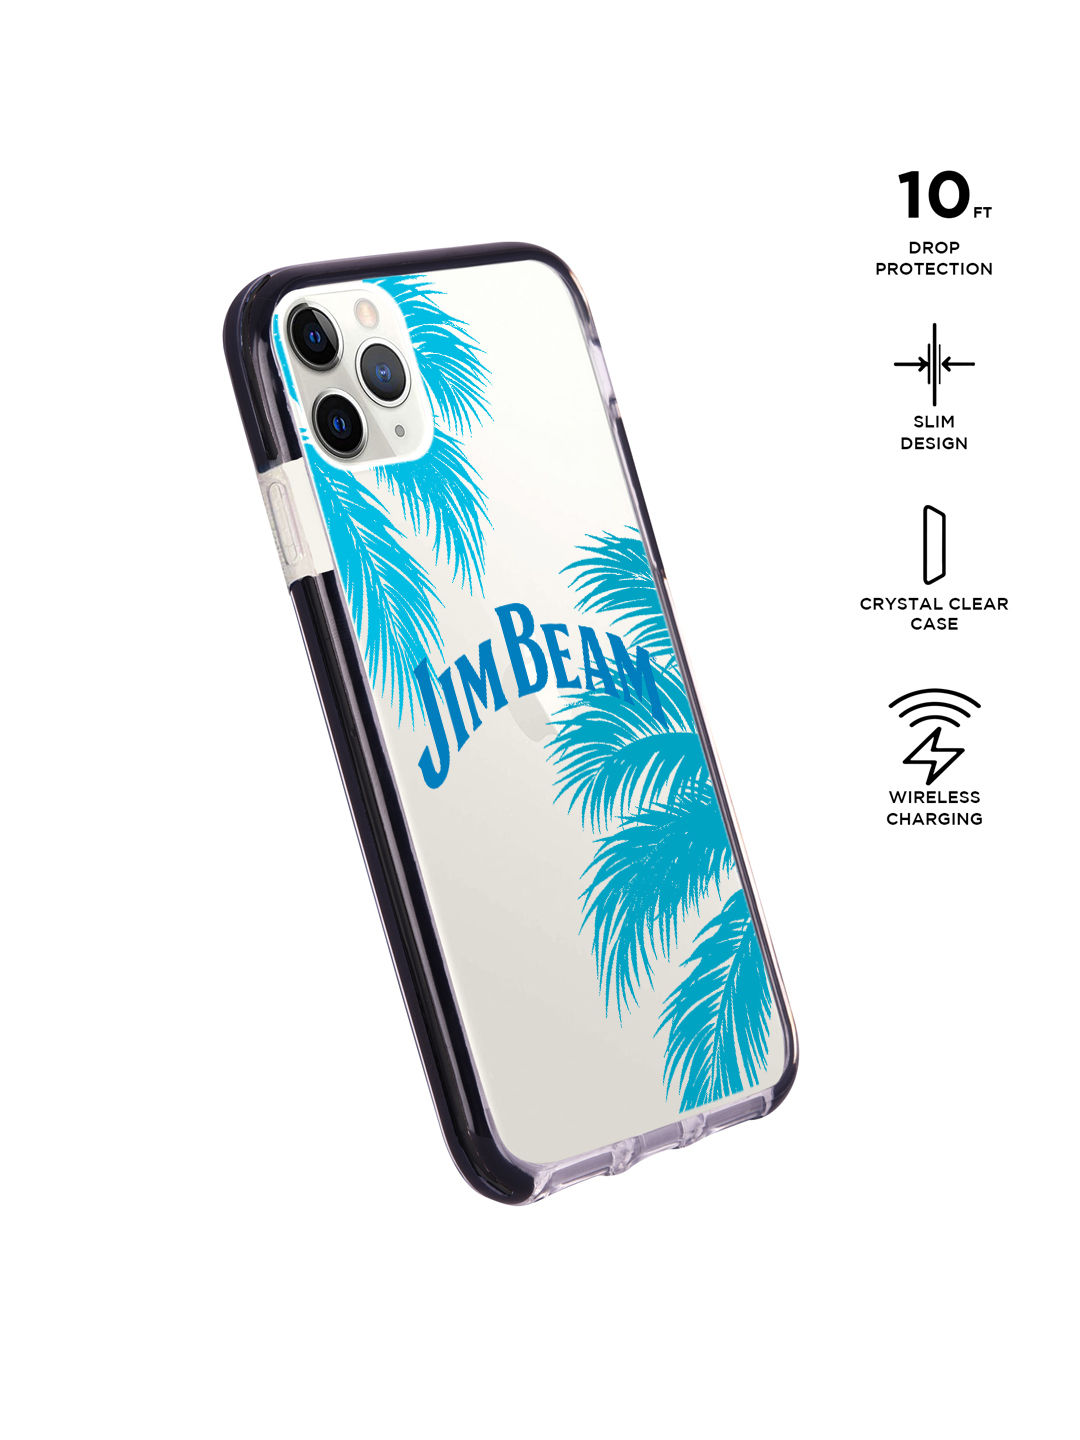 Jim Beam Palms Blue - Shield Case for iPhone 11 Pro